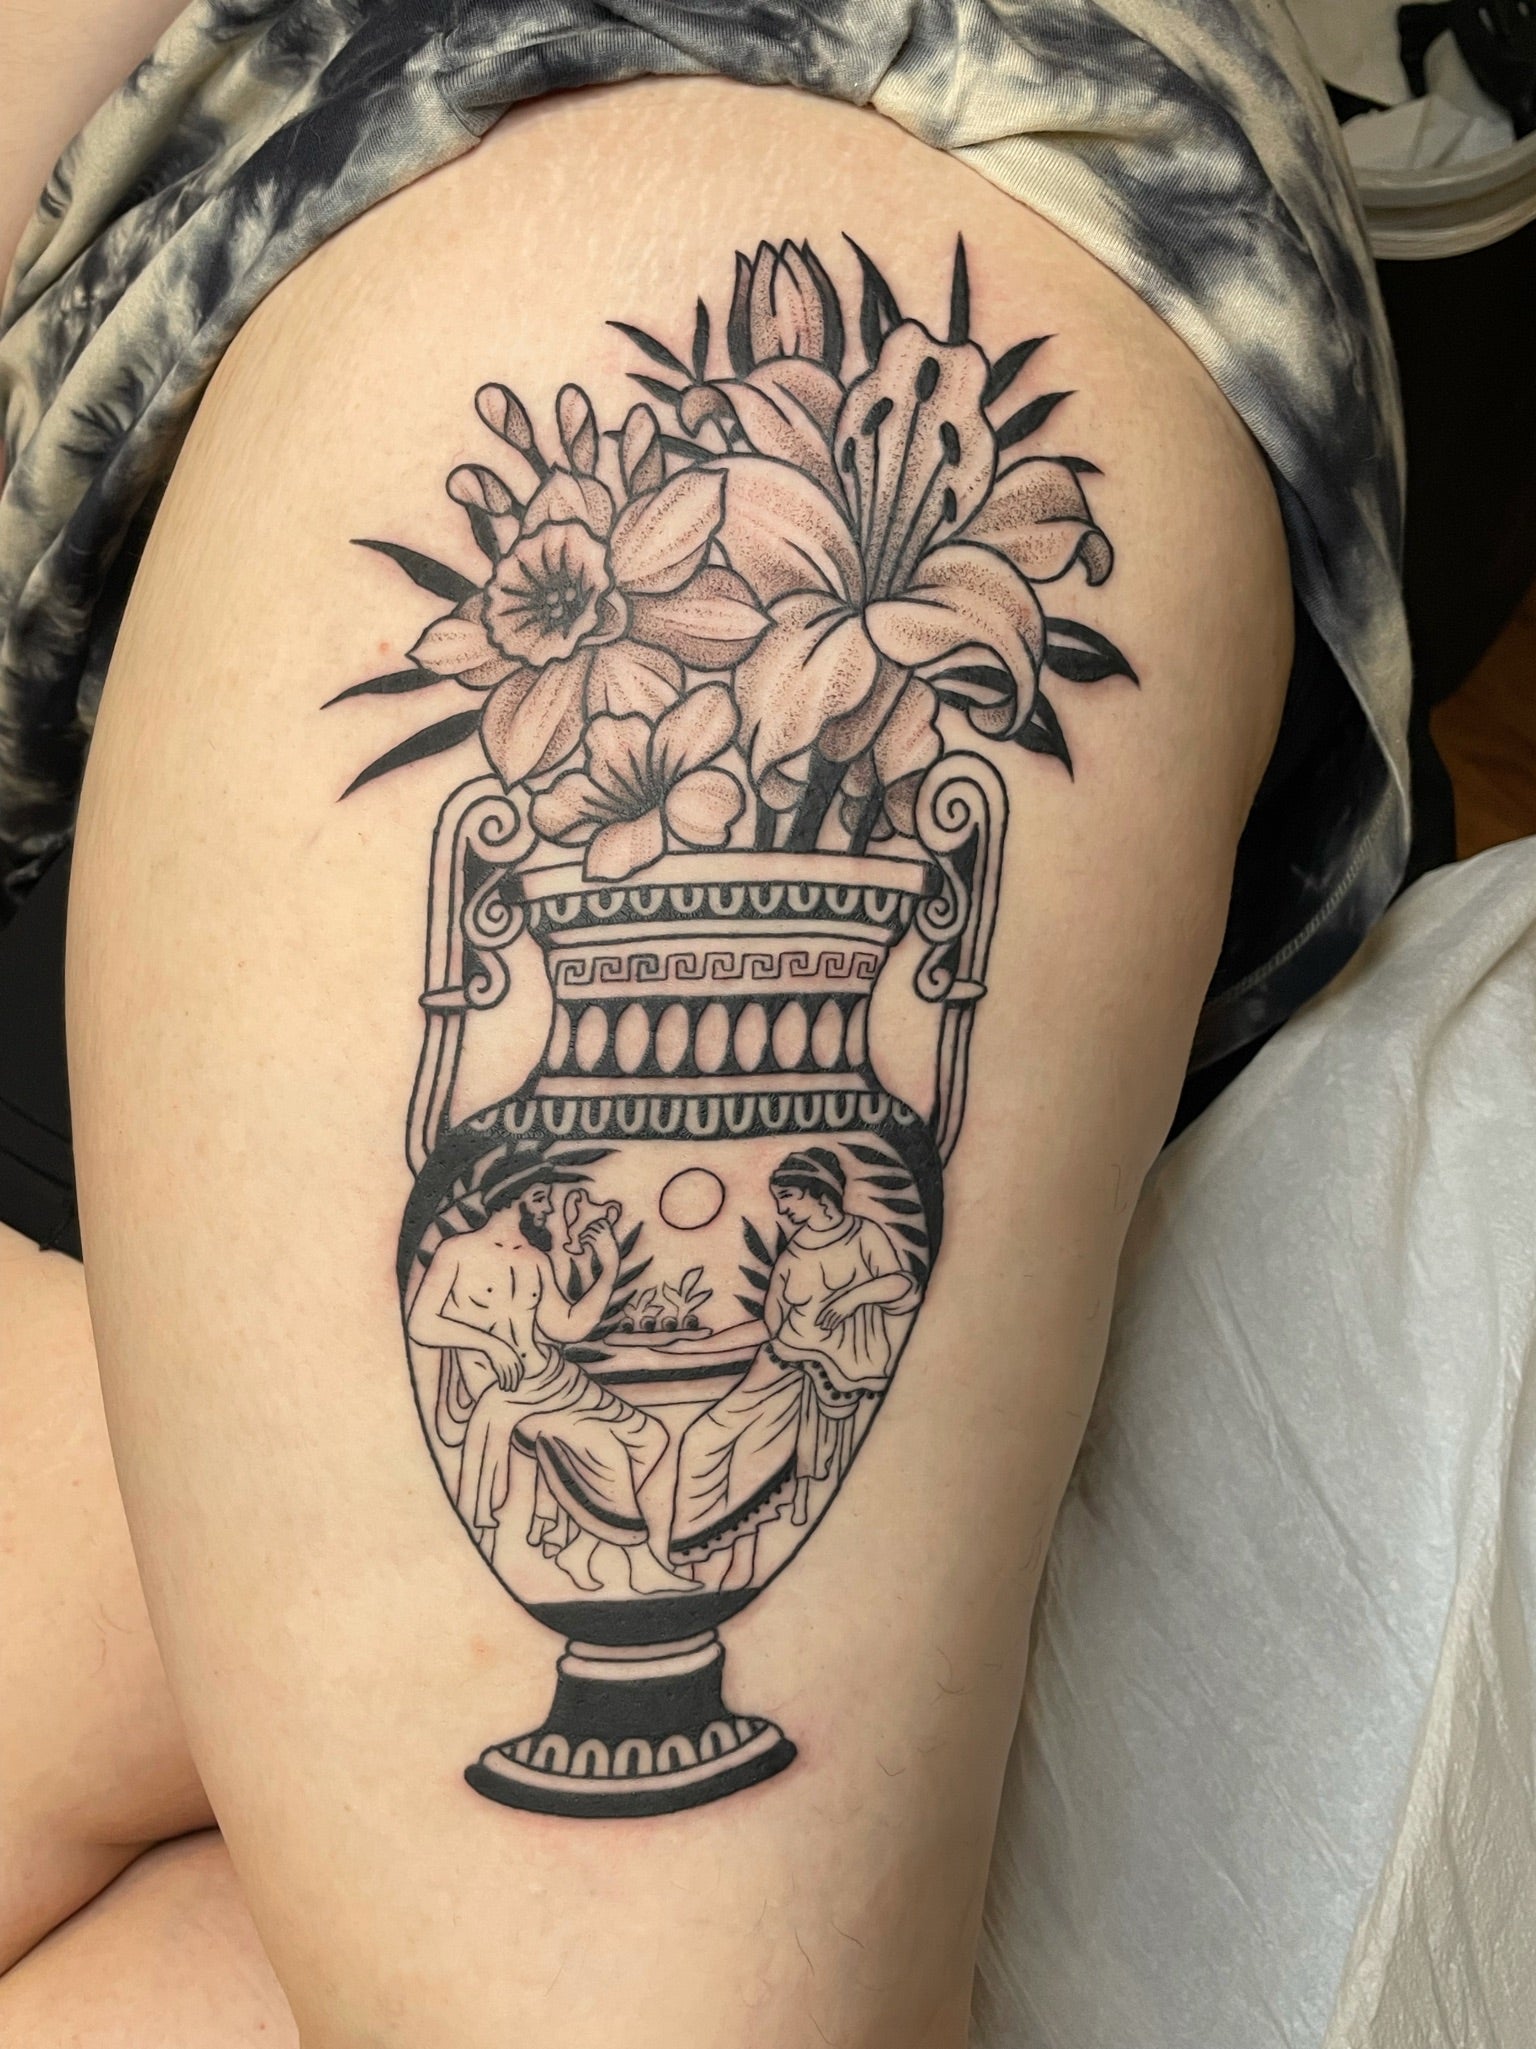 Advice I want a tattoo resembling ancient RomanGreek Pottery Should it  be in Redfigure or BlackFigure Style Examples in Comments  rtattoos